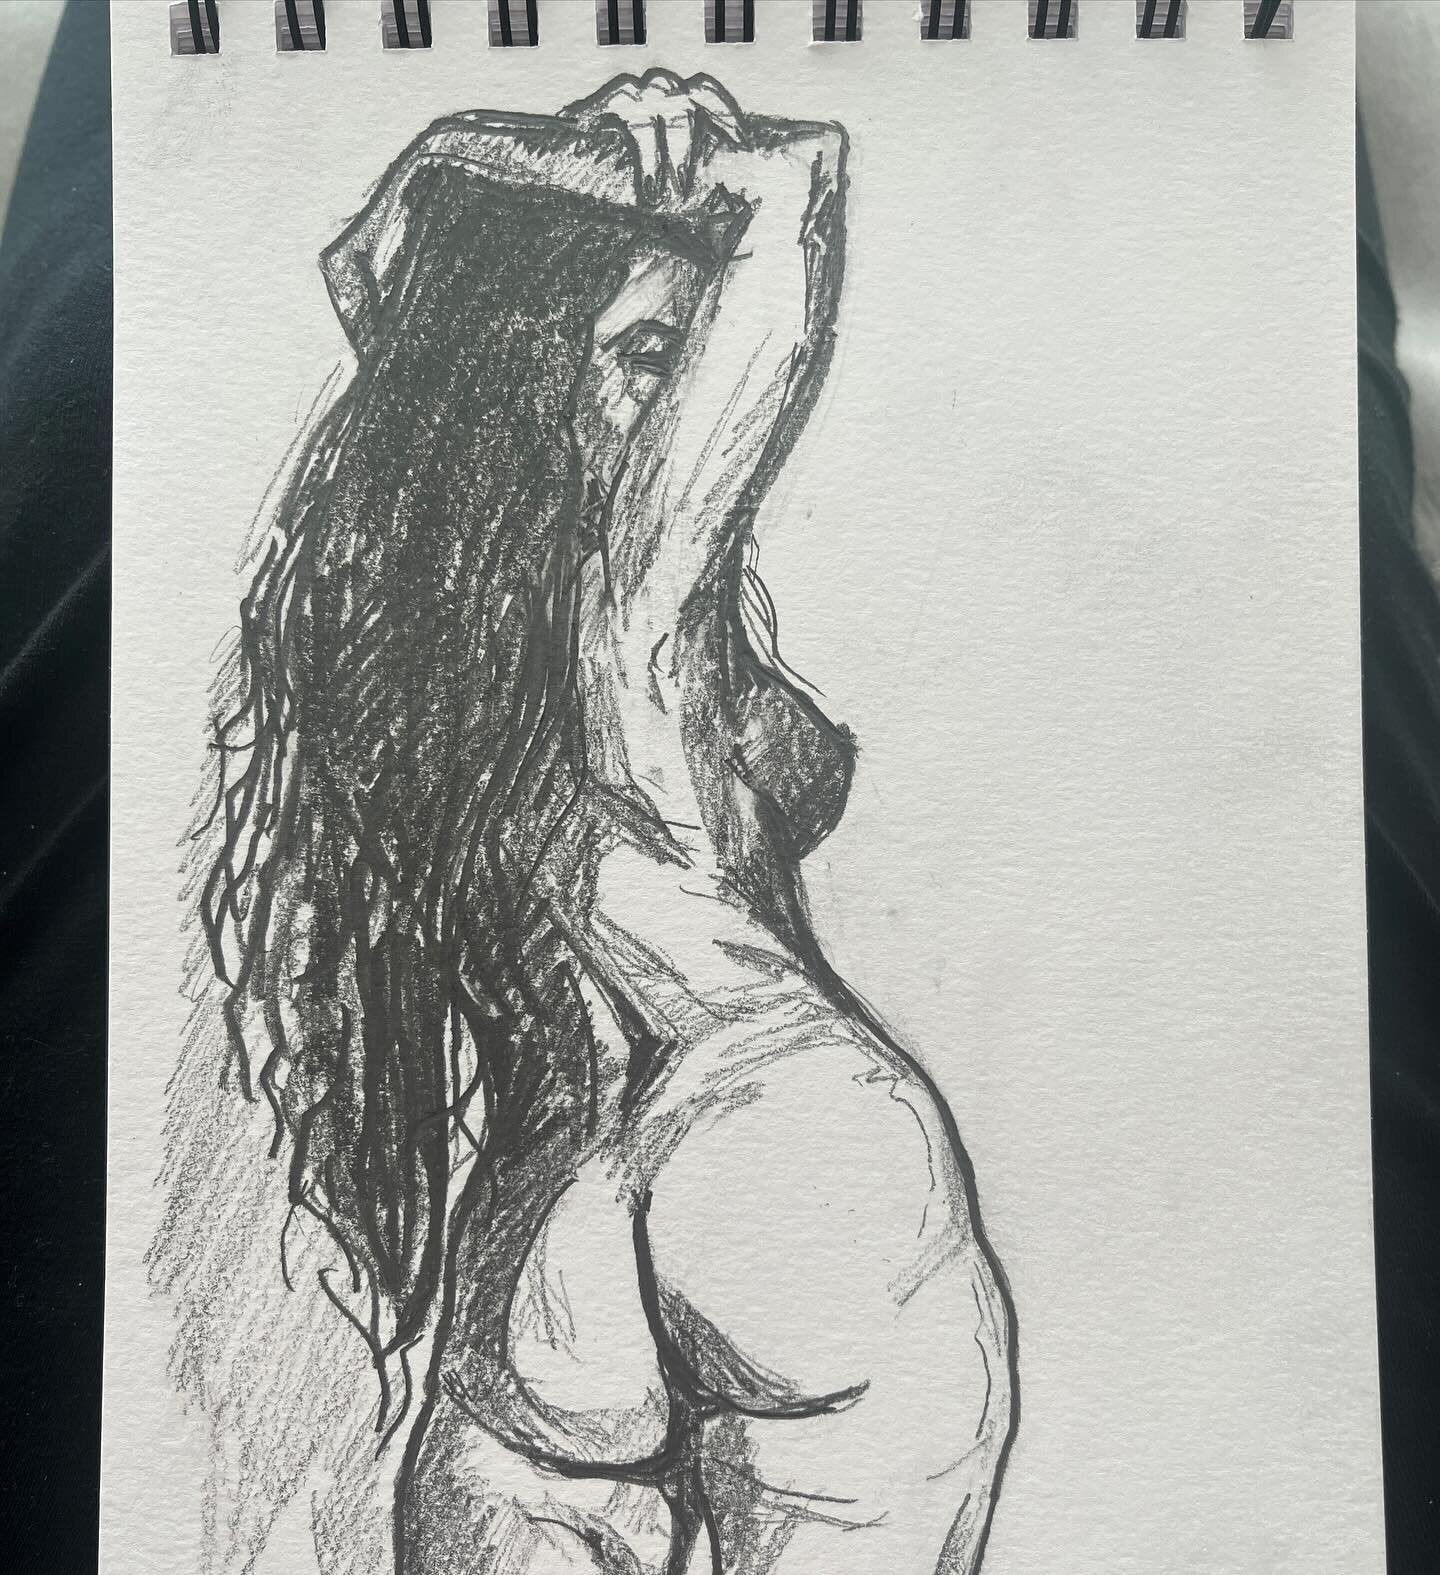 Perfect chance to get back into some life drawing, while I&rsquo;m sitting with my fractured foot up on ice 🧊😬 This one is from an amazing life drawing session with the fantastic @dropdeadgorgeousdrawing @guybourdinofficial session which unfortunat